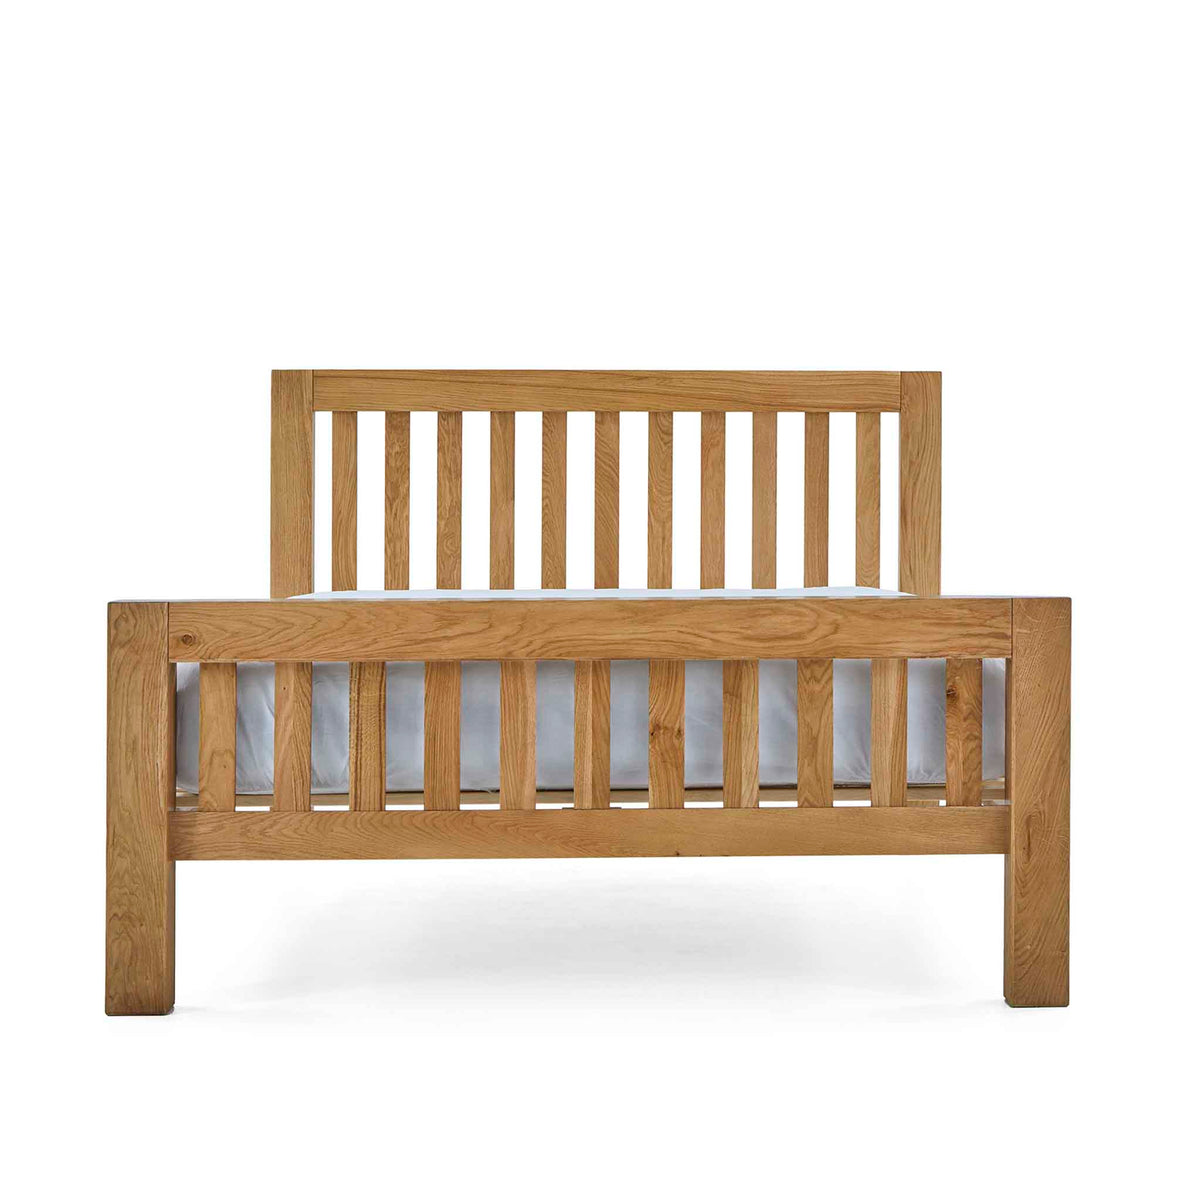 Abbey Grande Oak Bed Frame Double or King Size by Roseland Furniture